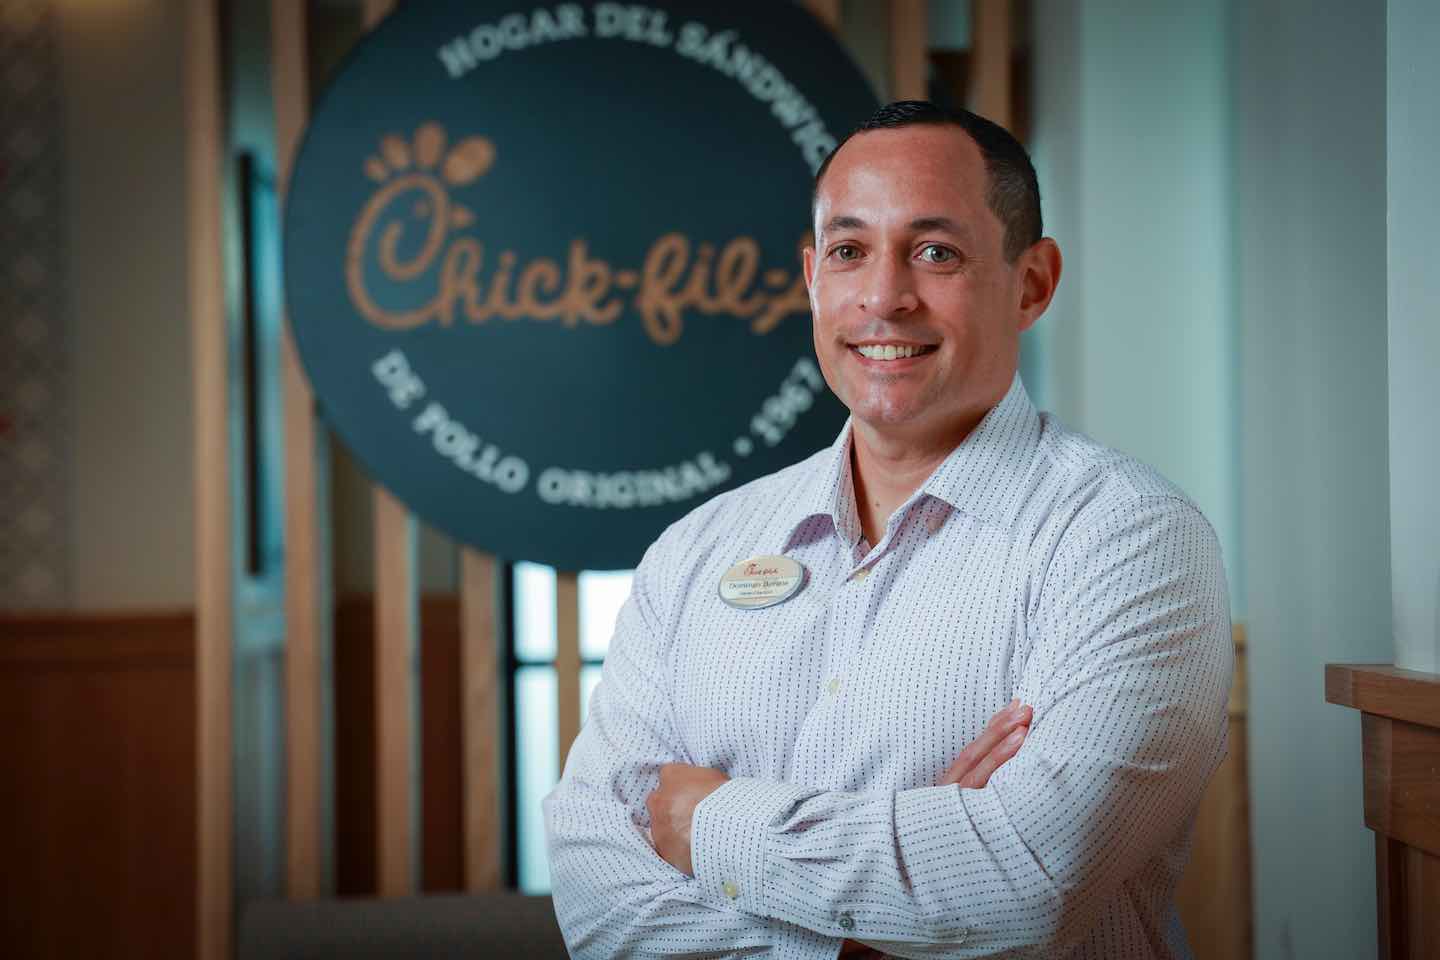 Headshot of Mingo Burgos, the Owner/Operator of Chick-fil-A Reina del Sur